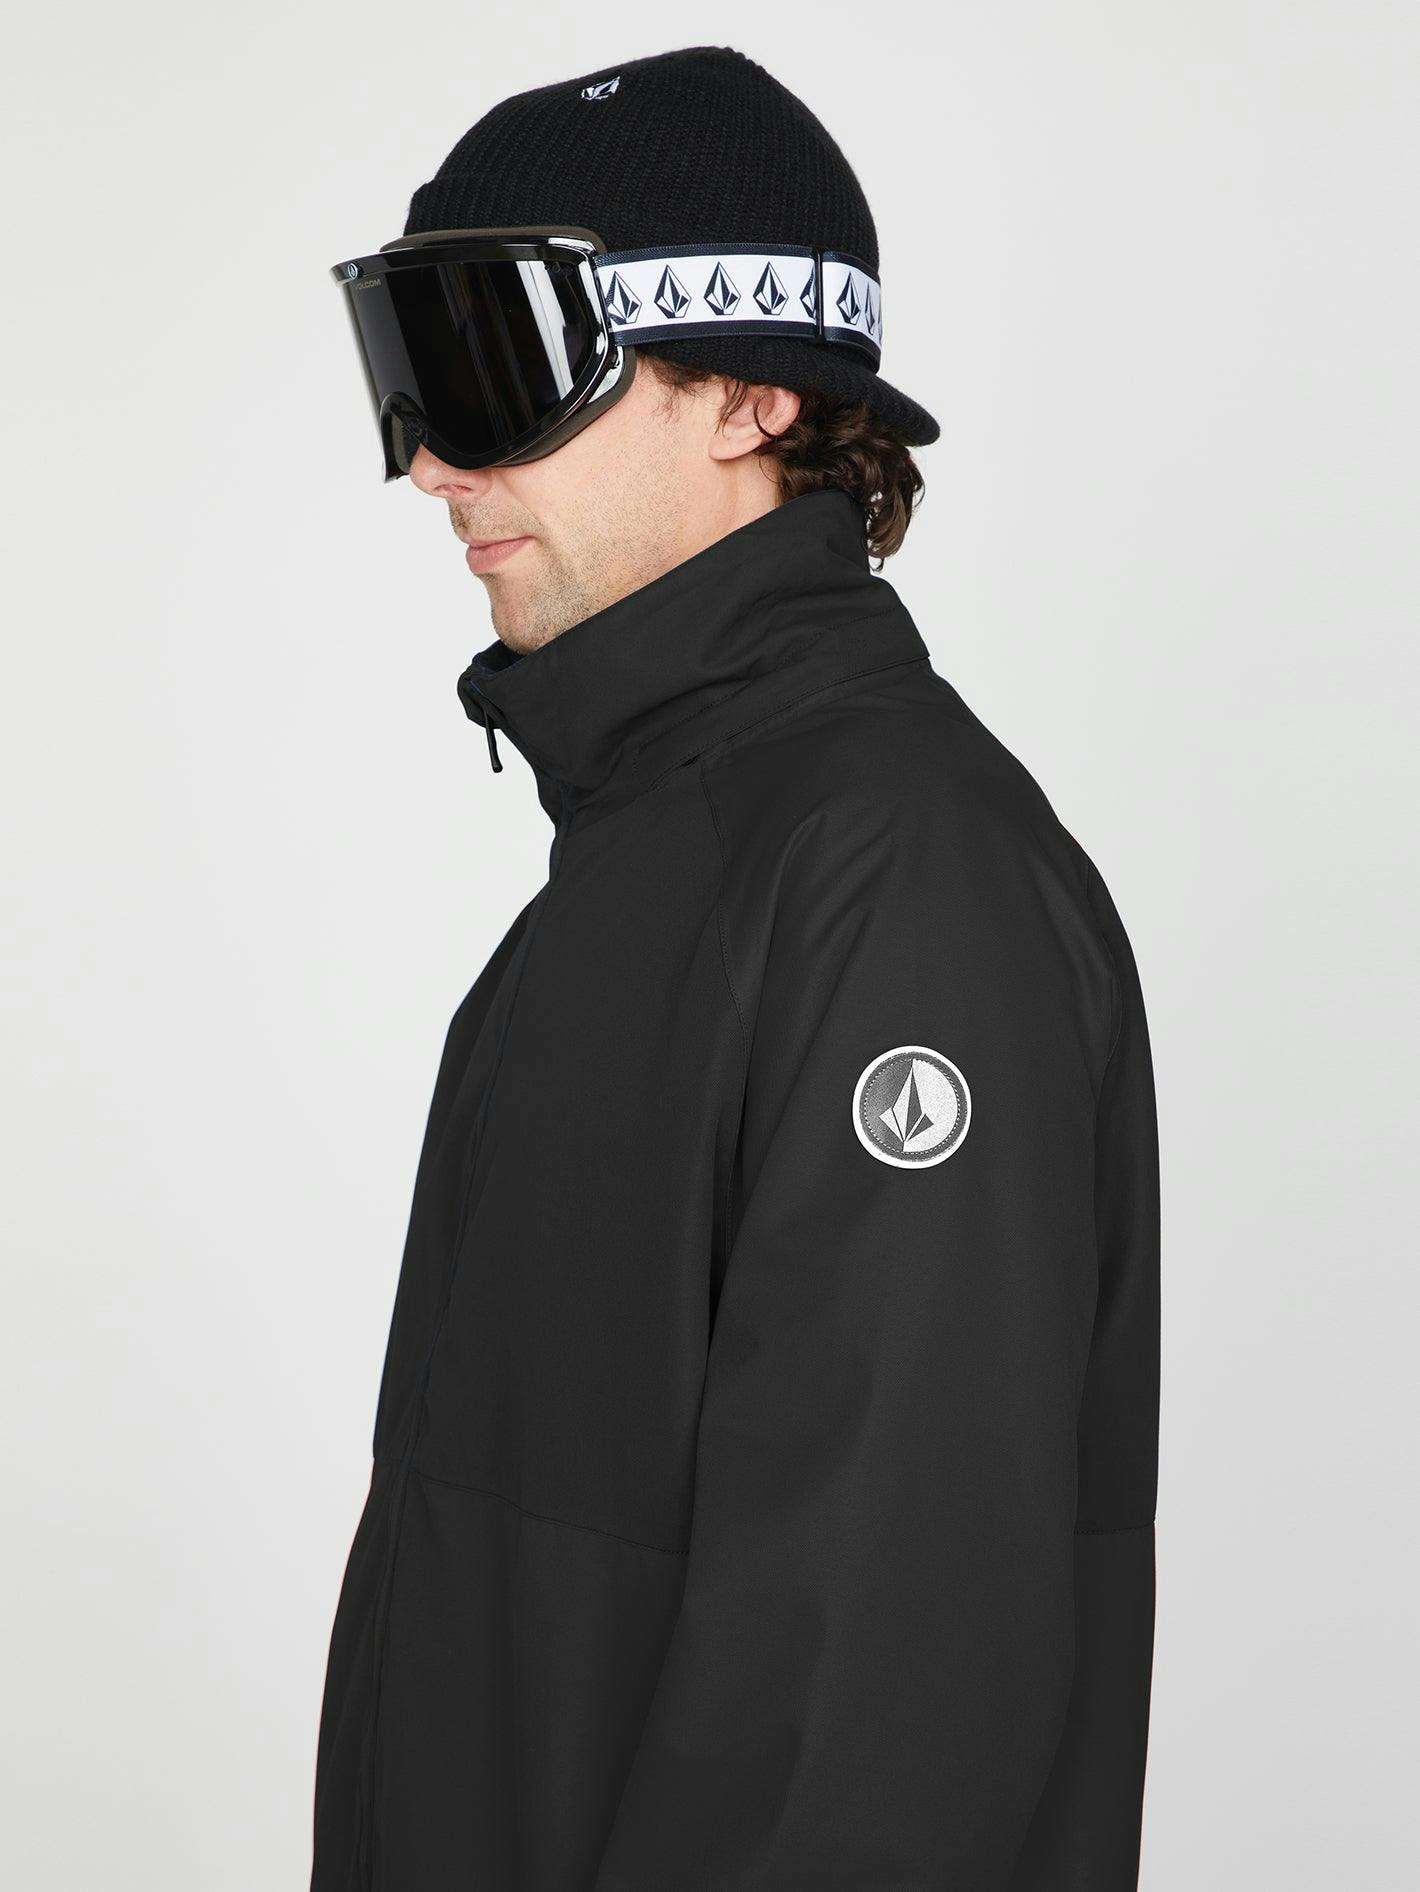 Volcom Men's 2836 Insulated Jacket | Curated.com